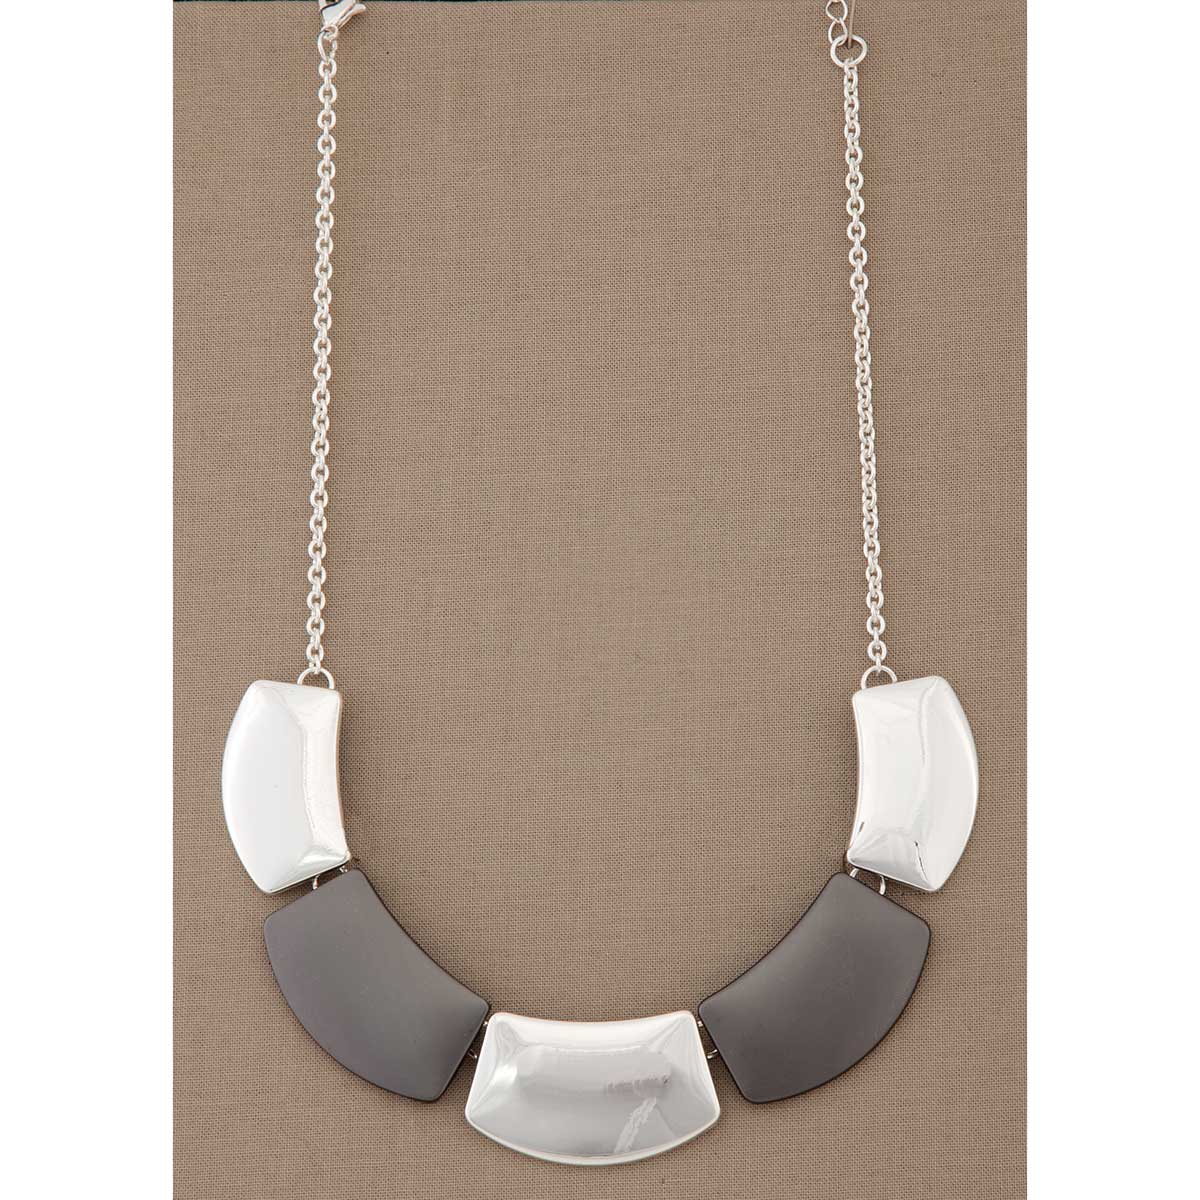 Silver and Gunmetal Rectangle Necklace 70sp